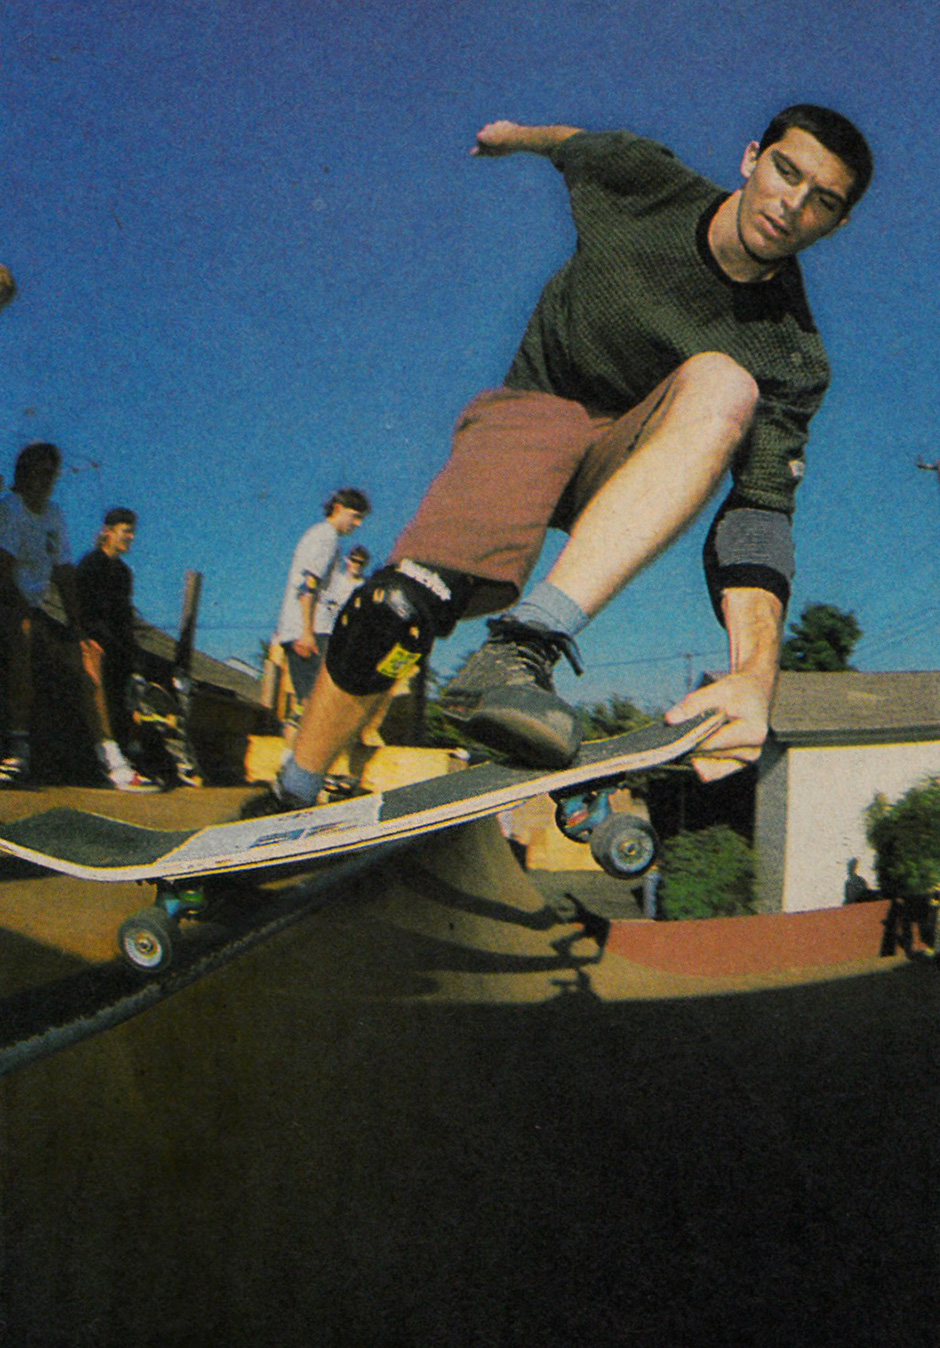 Neil Blender does a fakie sweeper at Al's Ramp in 1989. Shot by Christian Kline